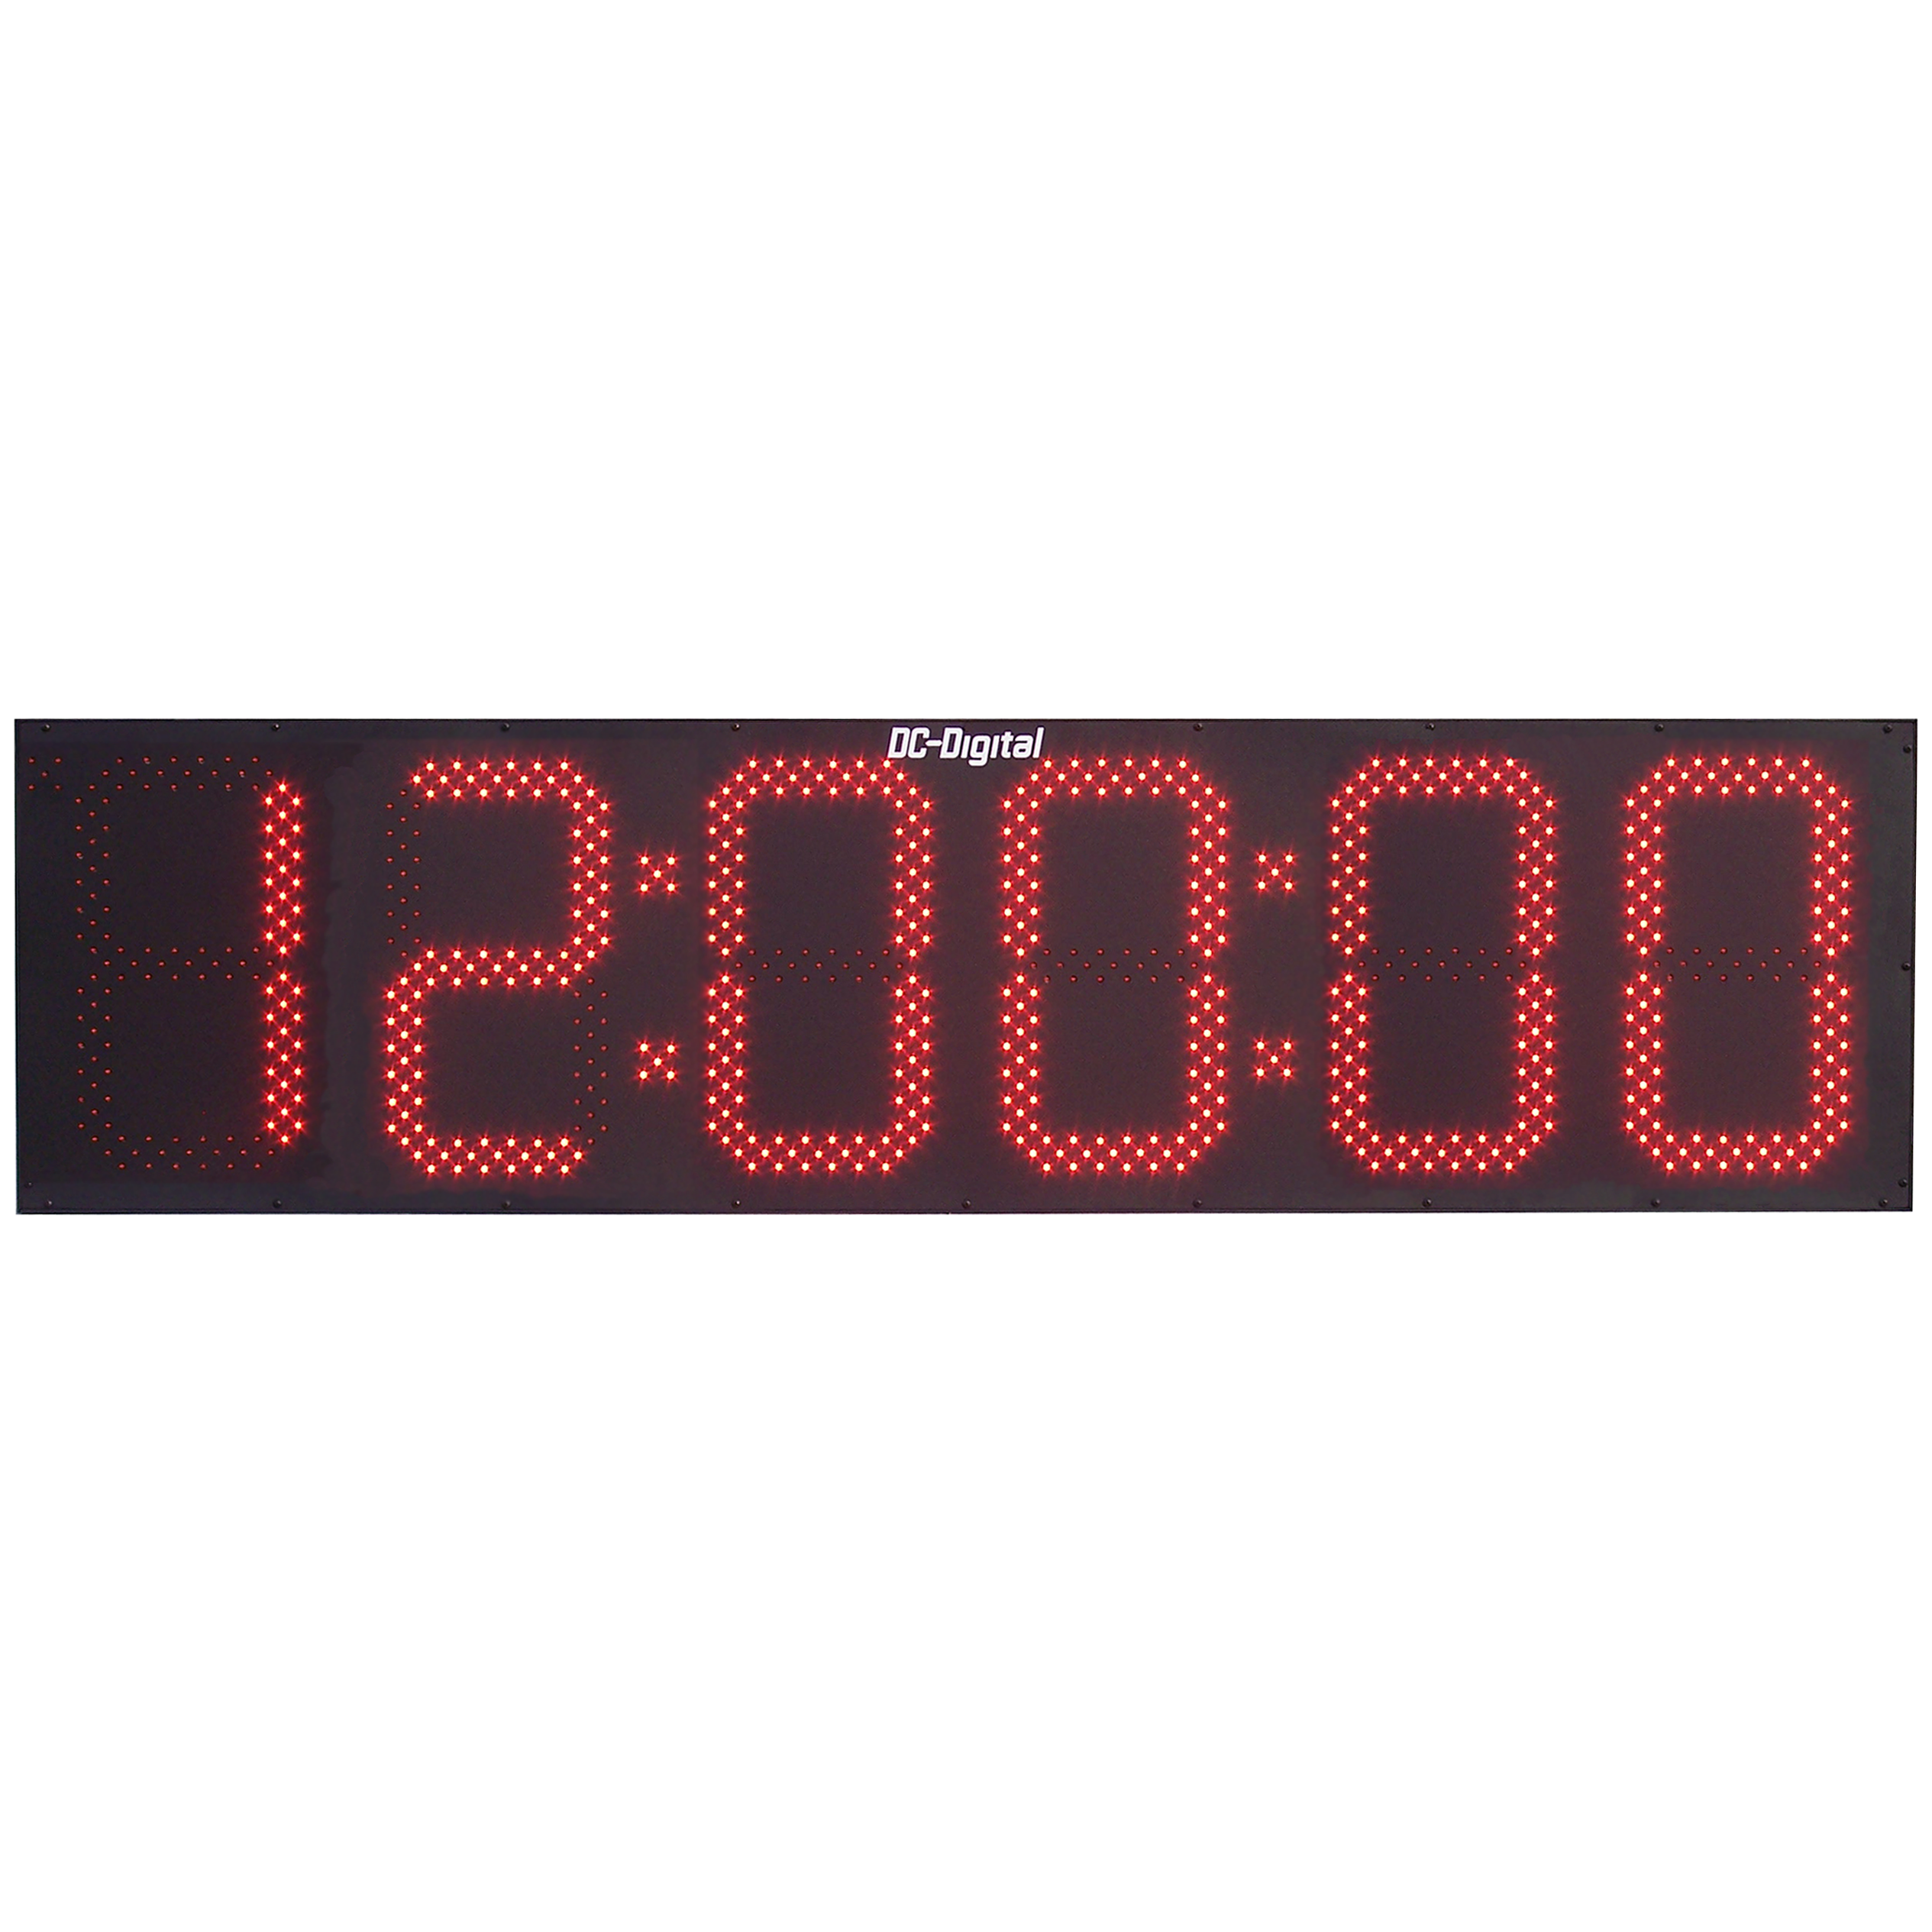 (DC-156-GPS) (6) 15.0 Inch LED Digit (Hours-Minutes-Seconds), GPS Receiver Synchronization, Atomic Time of Day Digital Clock (OUTDOOR)